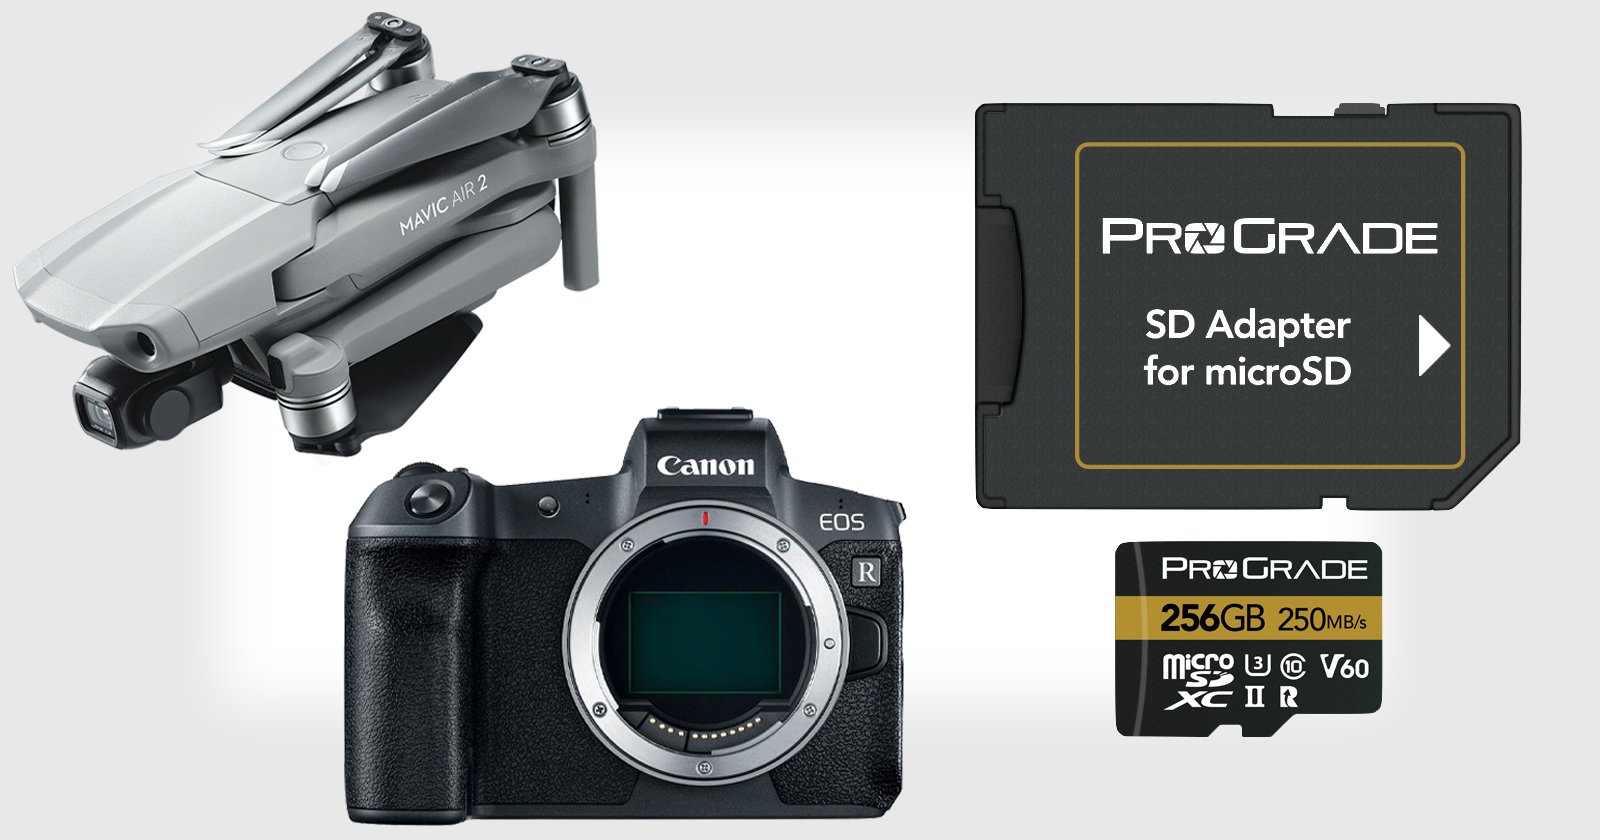 ProGrade Digital Unveils New microSD Cards that are Both Faster and Cheaper